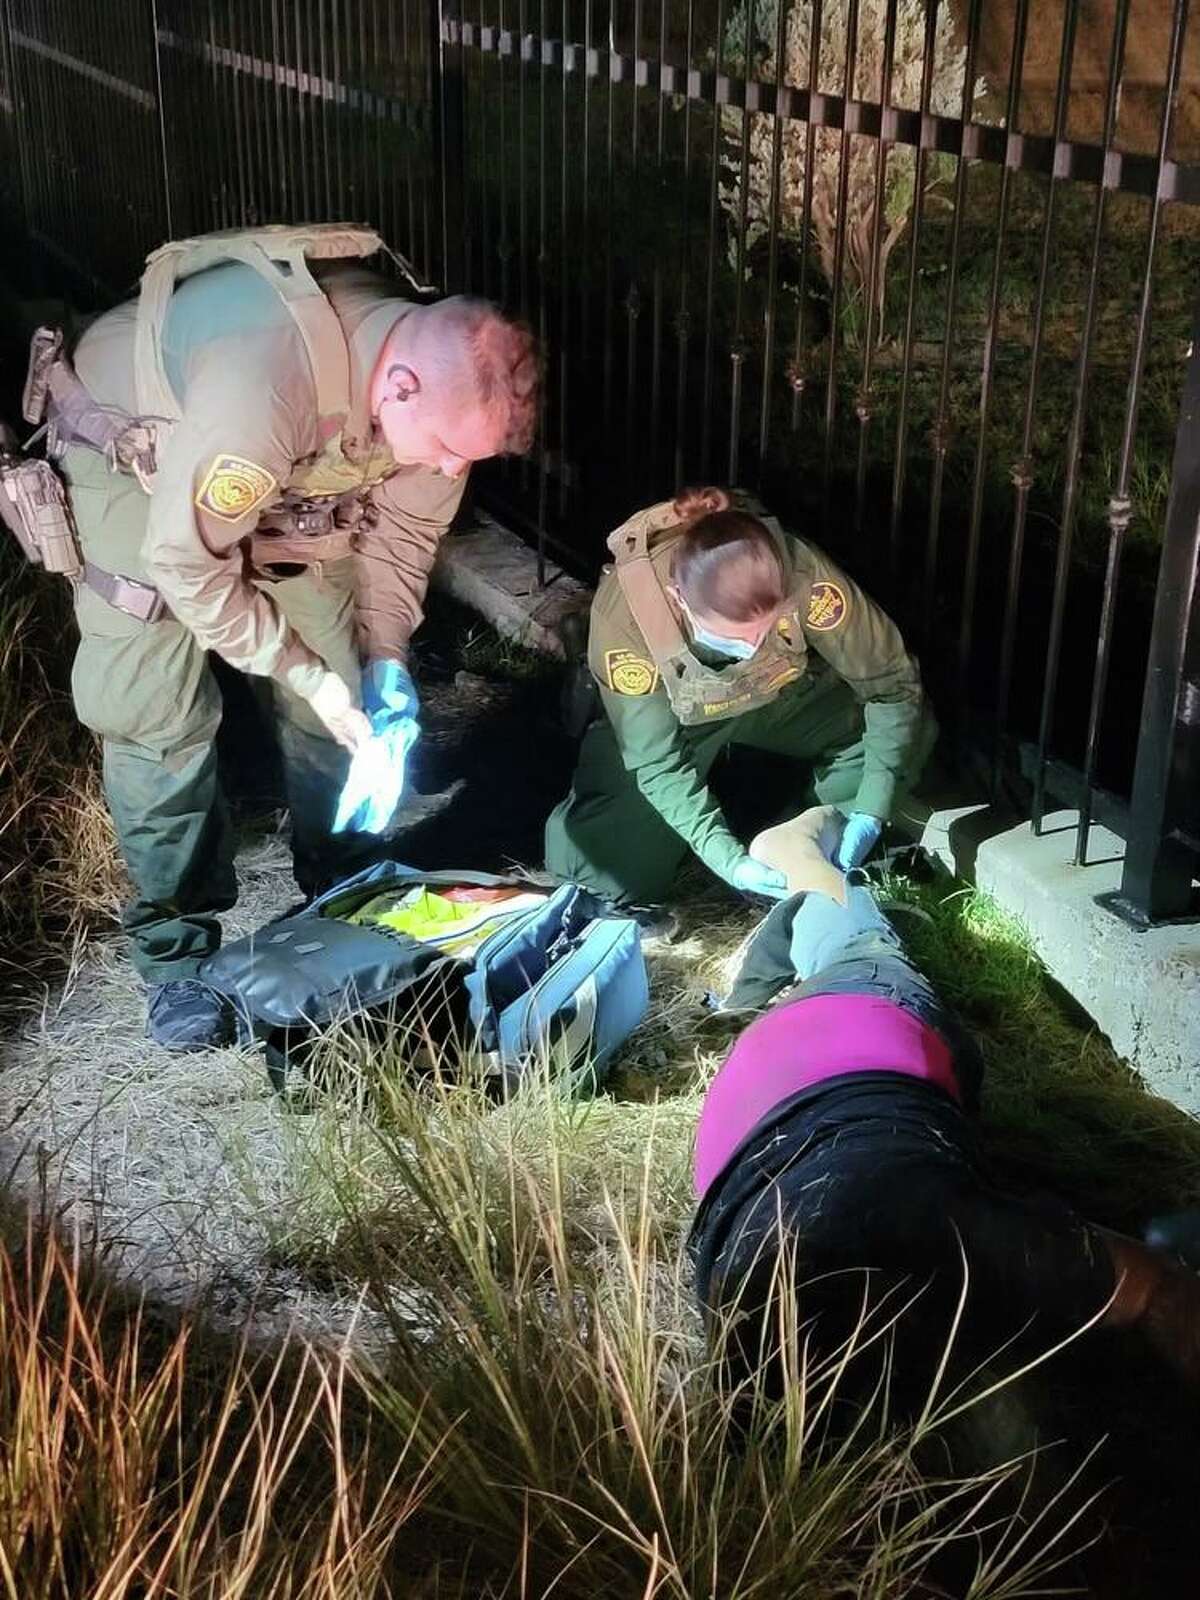 U.S. Border Patrol agents are seen rendering aid to a migrant woman who had an injury to her ankle. Authorities encountered her after responding to an injured person report early Tuesday near the Sacred Heart Children’s Home on U.S. 83.